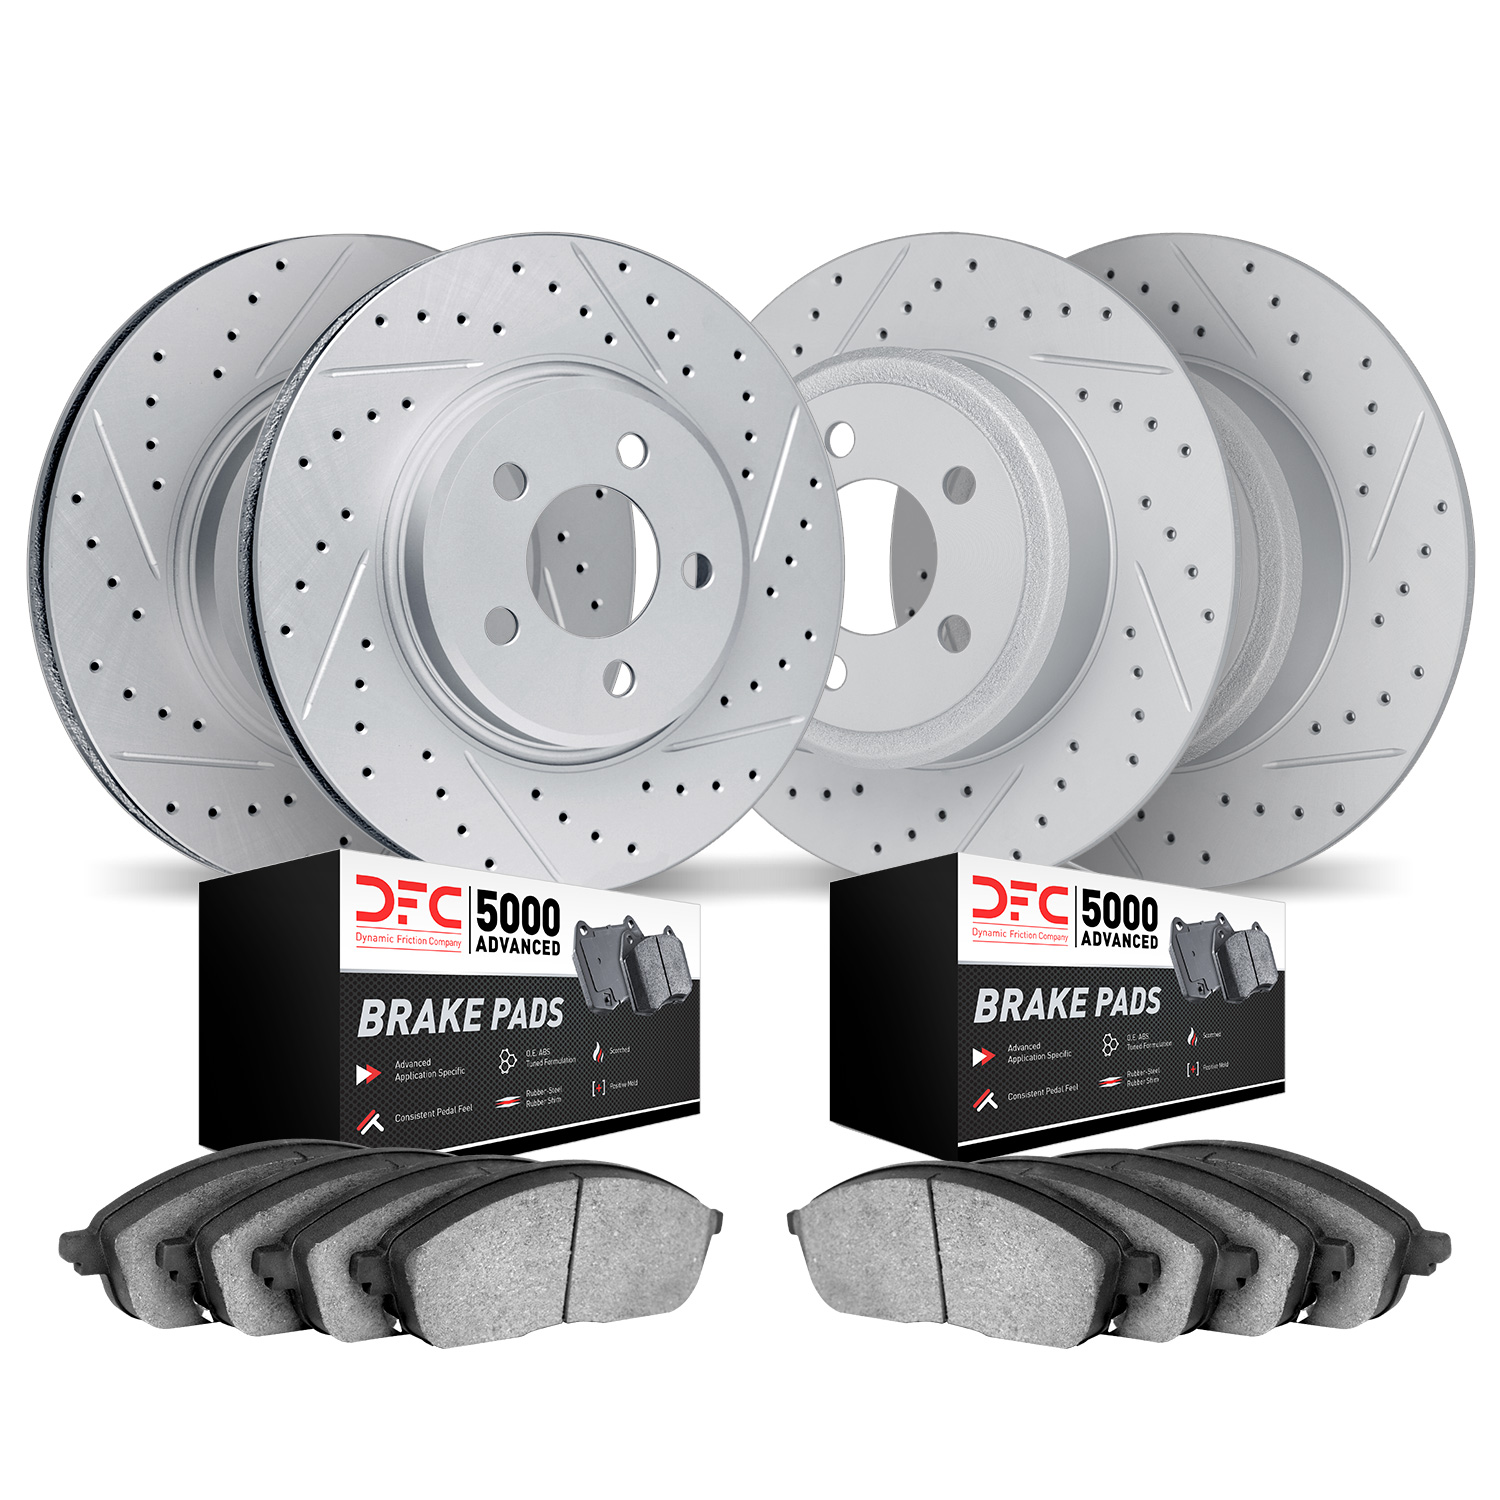 2504-76089 Geoperformance Drilled/Slotted Rotors w/5000 Advanced Brake Pads Kit, 2001-2003 Lexus/Toyota/Scion, Position: Front a